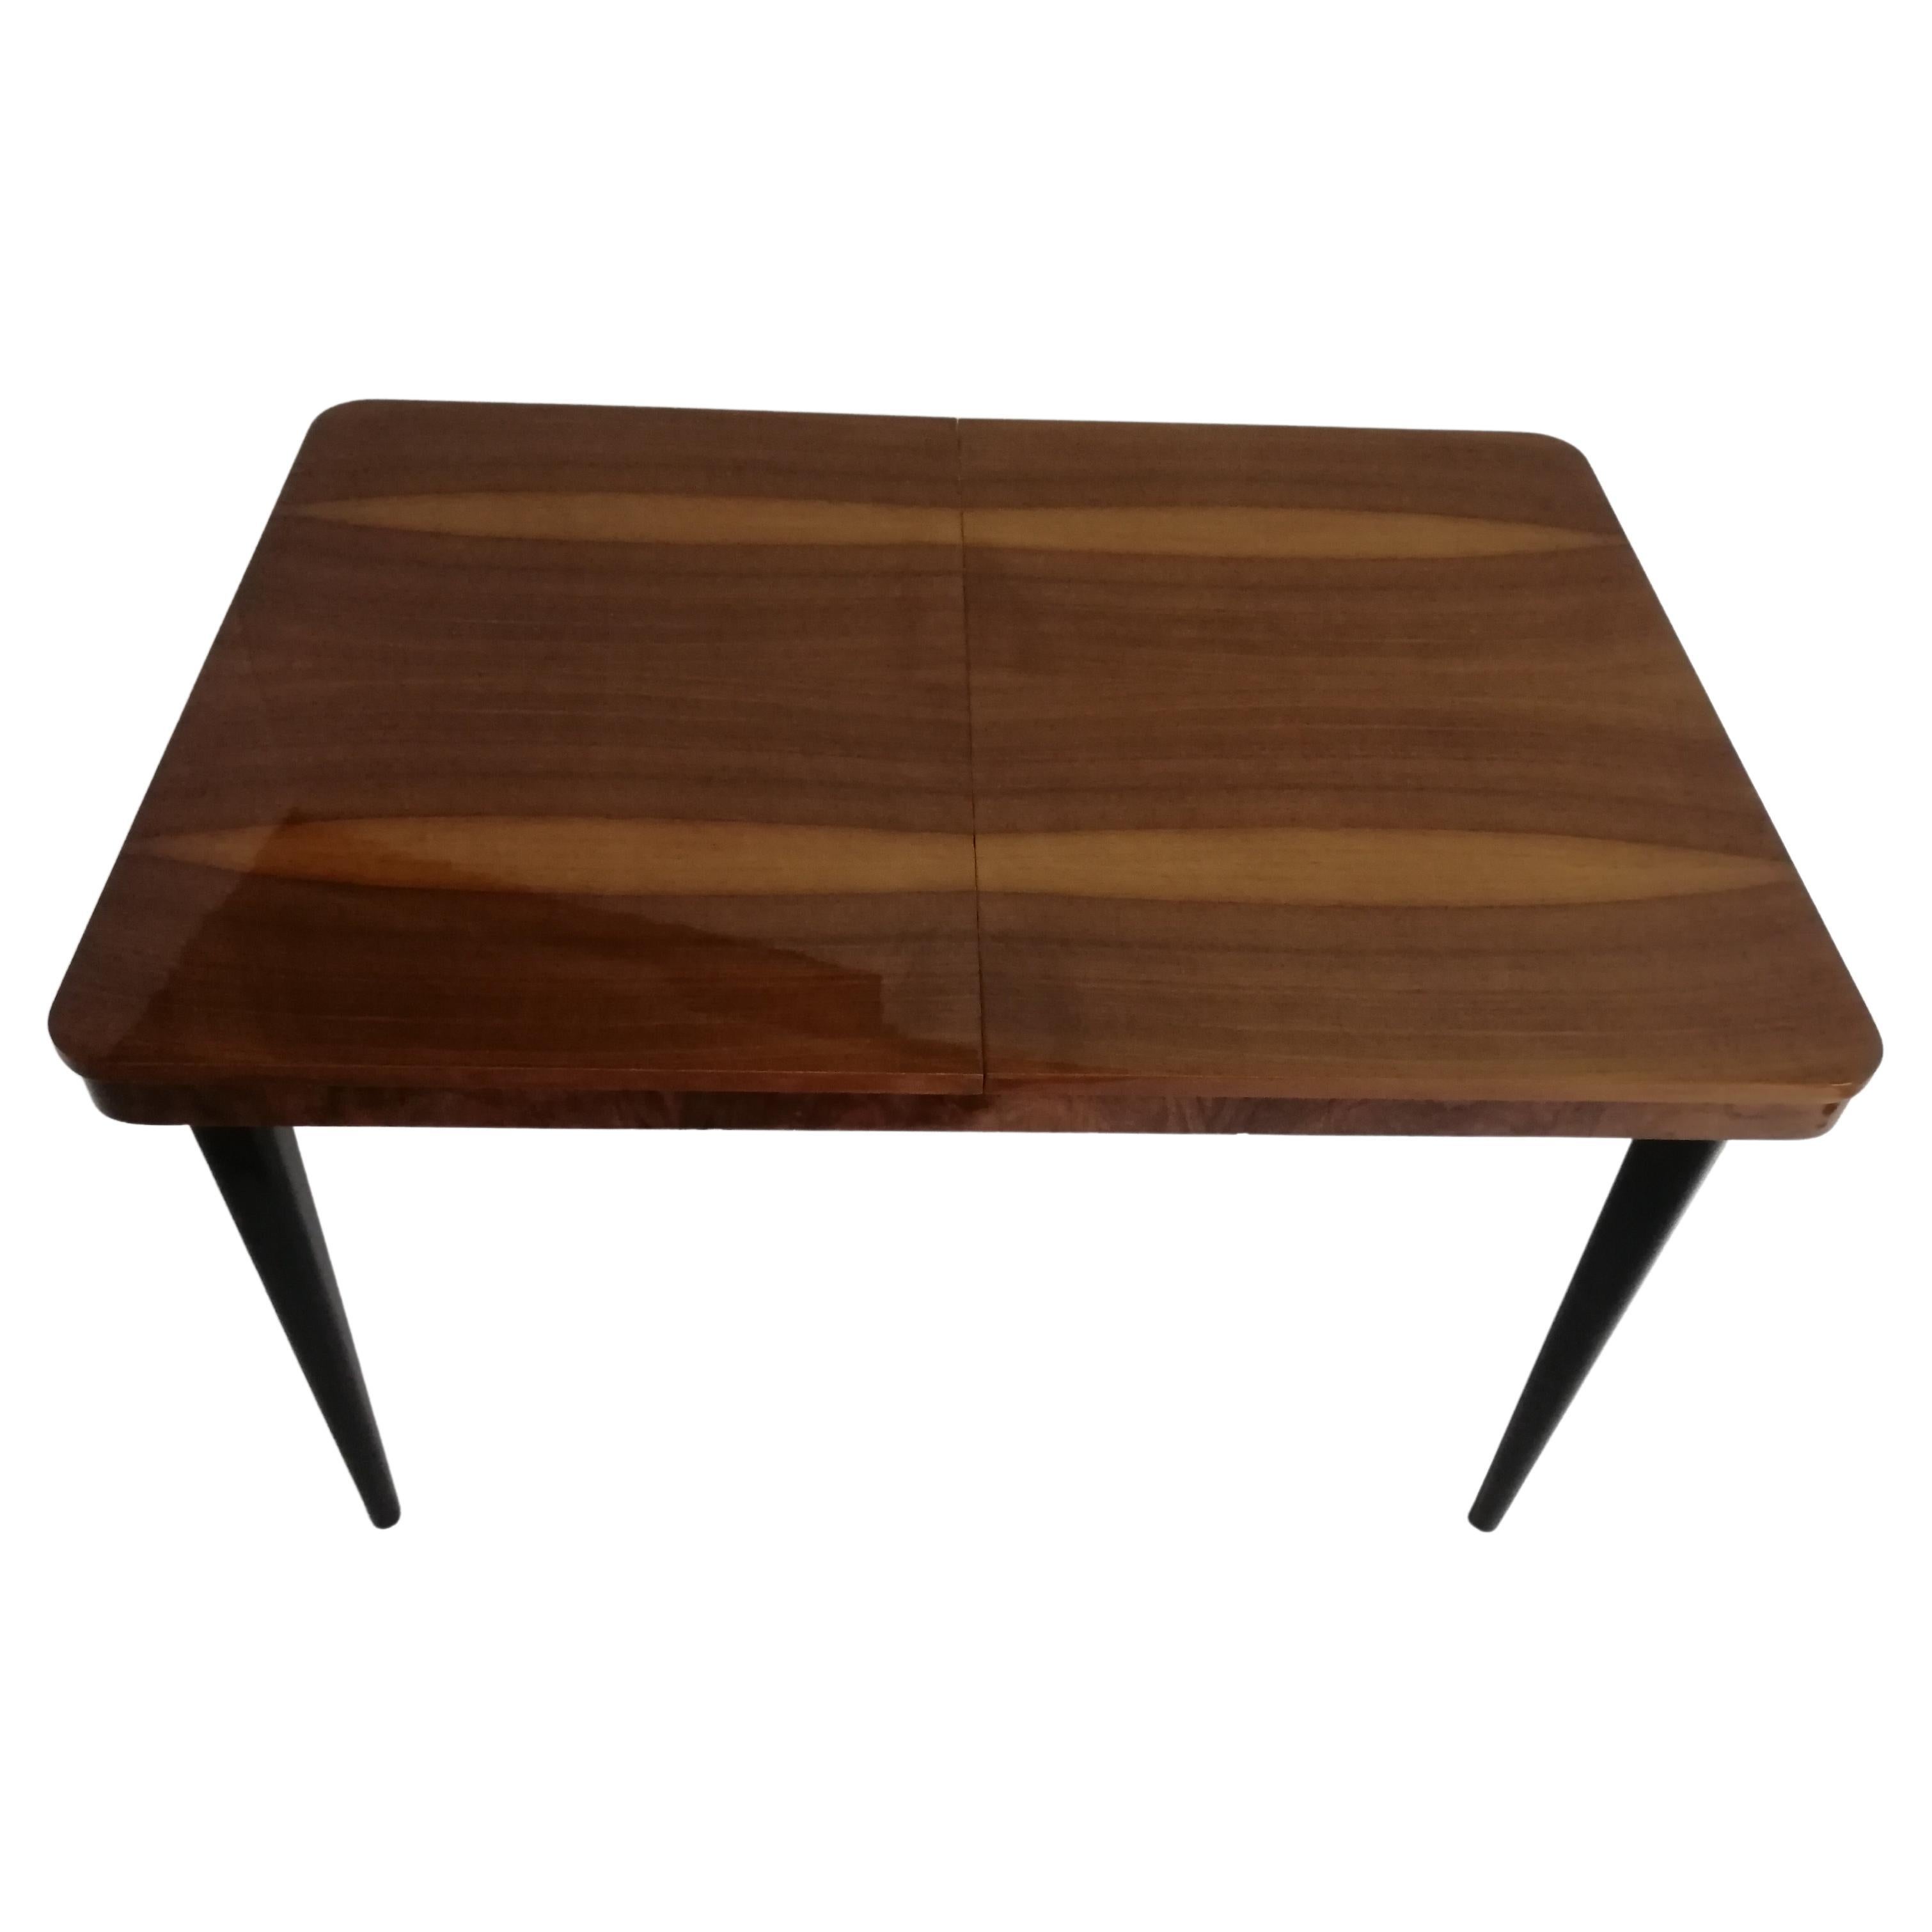 Art Deco table by J. Halabala from 1960s.

Art Deco table by the famous Czech designer J. Halabala, 1940. Jindrich Halabala, (a Czech designer ranked among the most outstanding creators of the modern period. The peak of his career fell on the